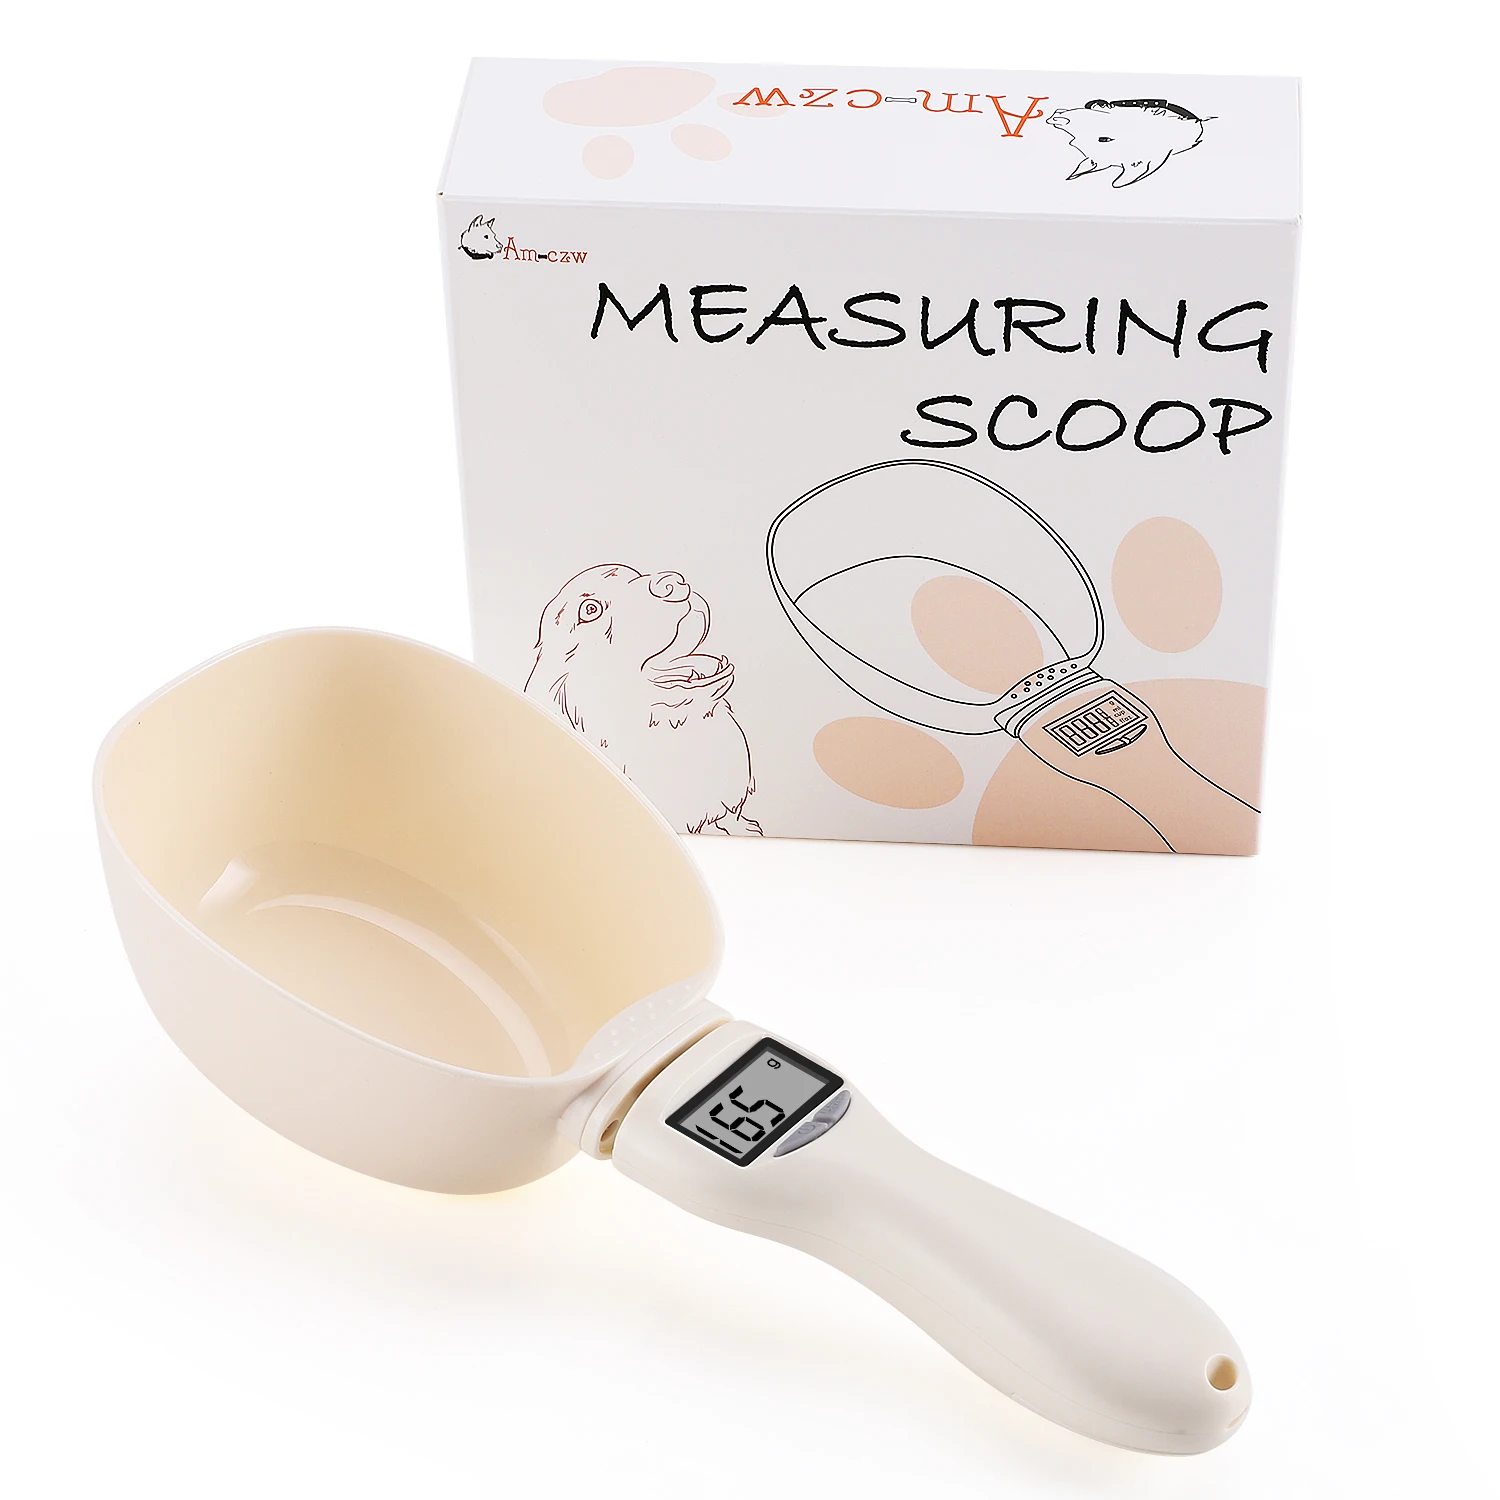 

800g/1g Pet Food Measuring Scoop For Dog Cat Feeding Bowl Kitchen Scale Cup - Measuring Cup Portable With Led Display, White